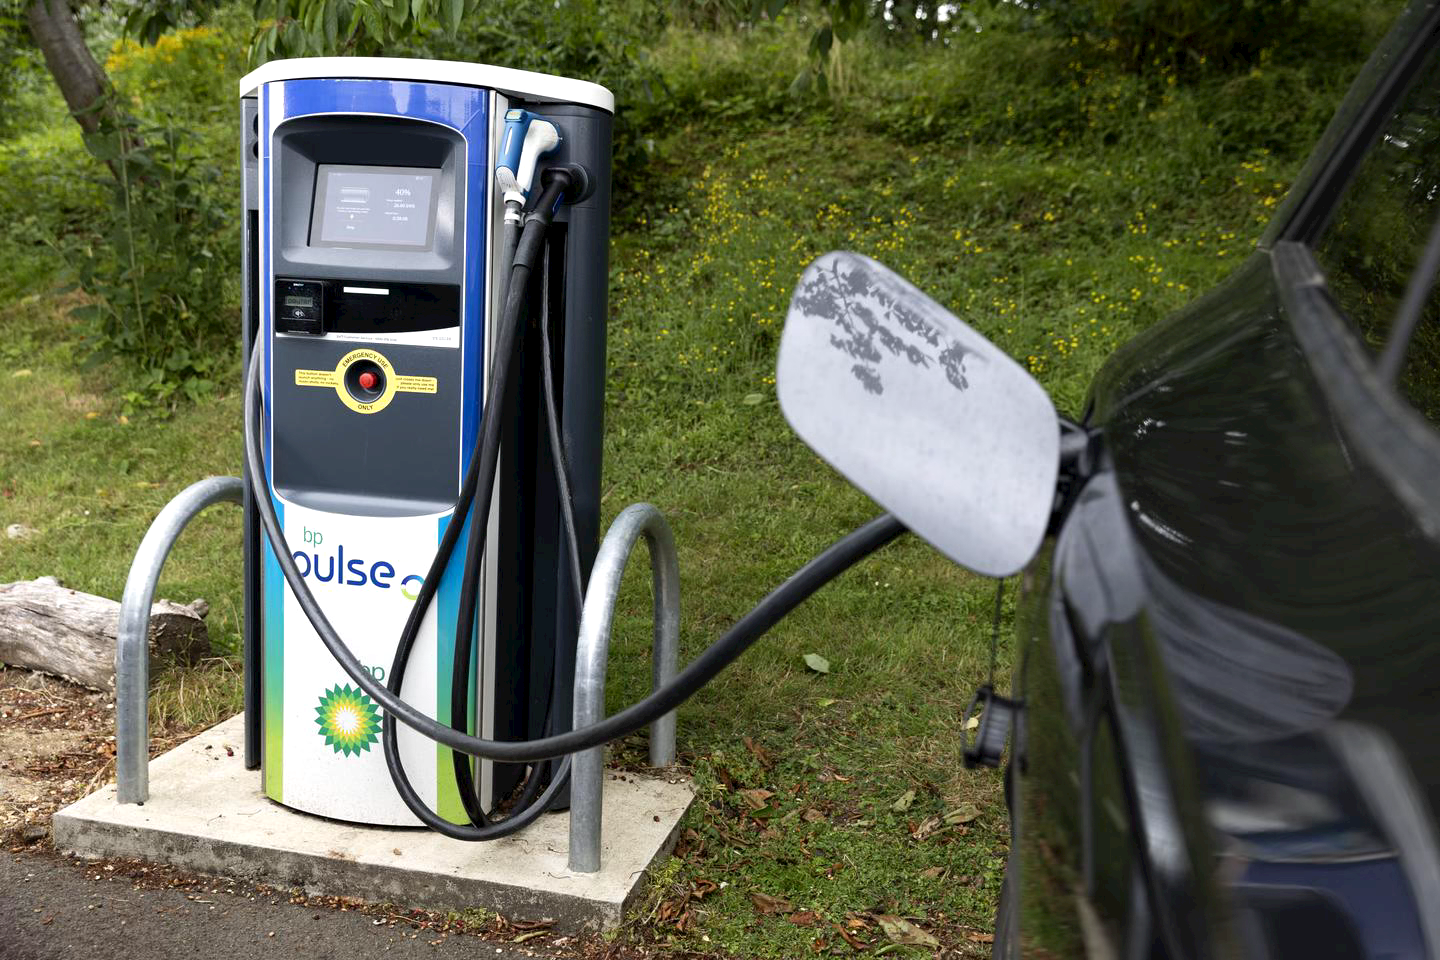 A bp pulse charge point charging an electric vehicle